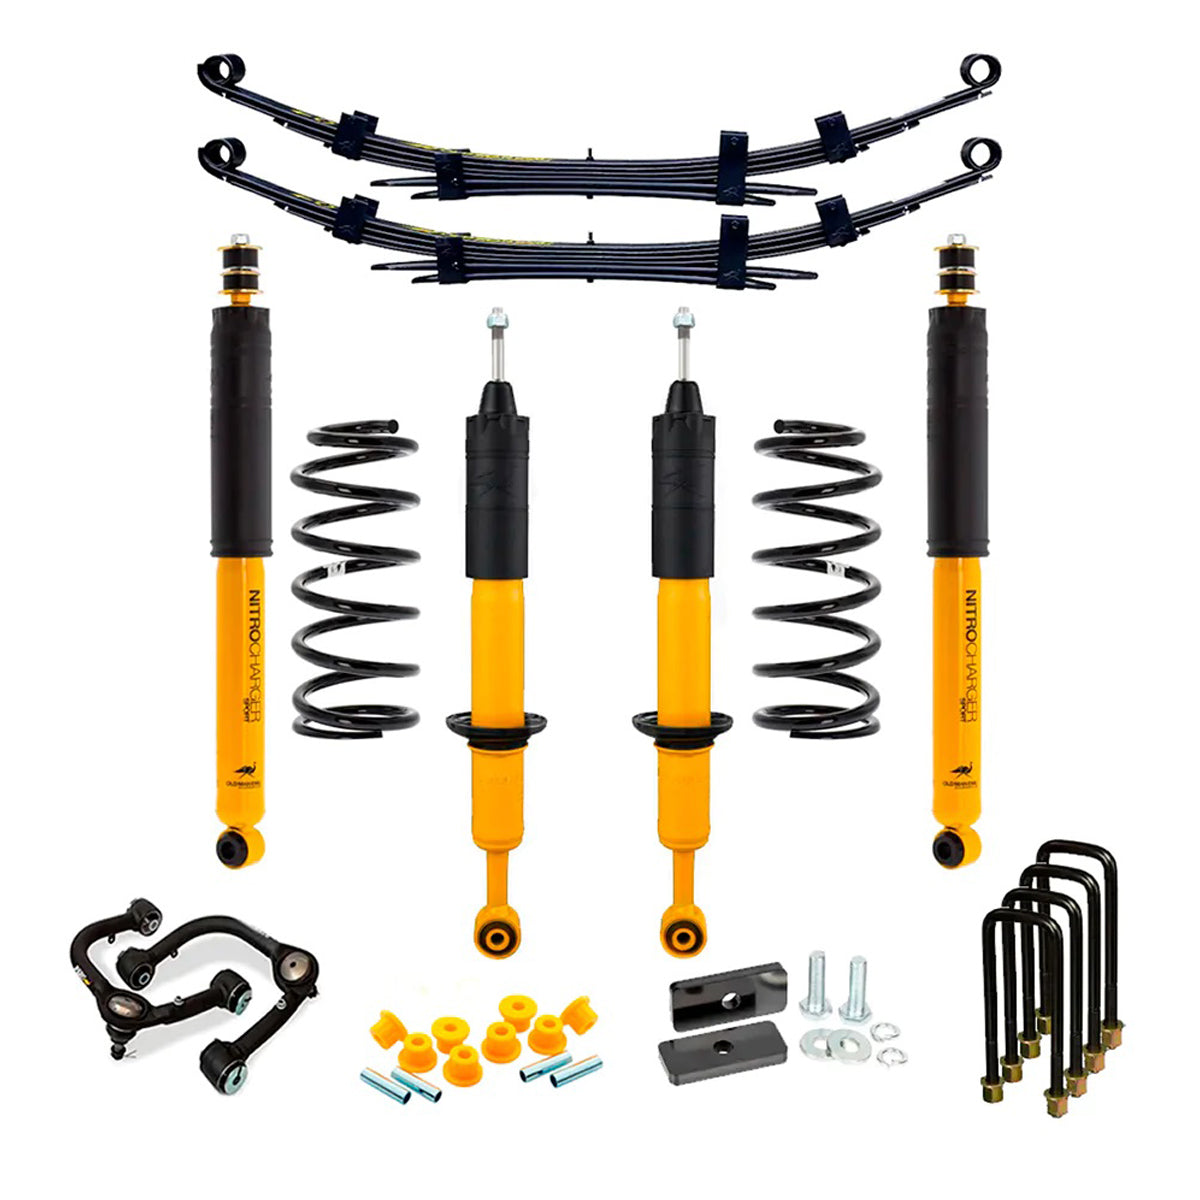 OME 3 inch Lift Kit for Tacoma (05-15) - Front Shocks Assembly